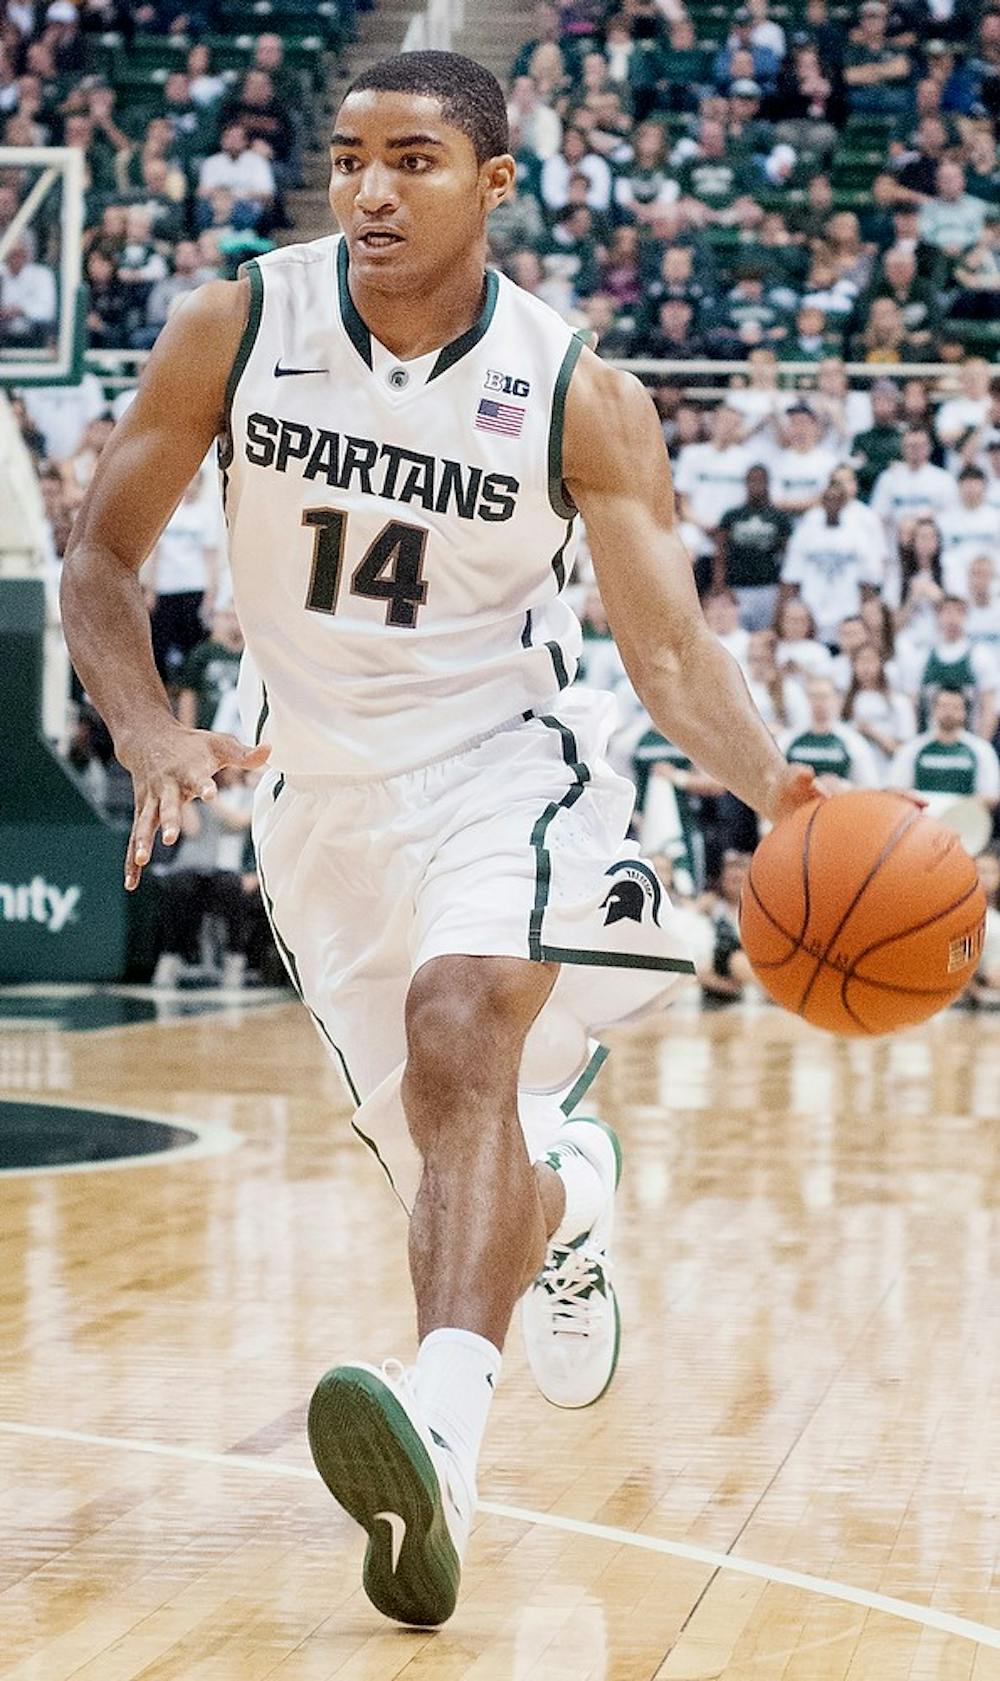 	<p>Freshman guard Gary Harris dribbles the ball down the court during the game against Texas Southern on Sunday at Breslin Center. Harris scored 19 points for the Spartans, helping them beat the Tigers 69-41. Natalie Kolb/The State News</p>